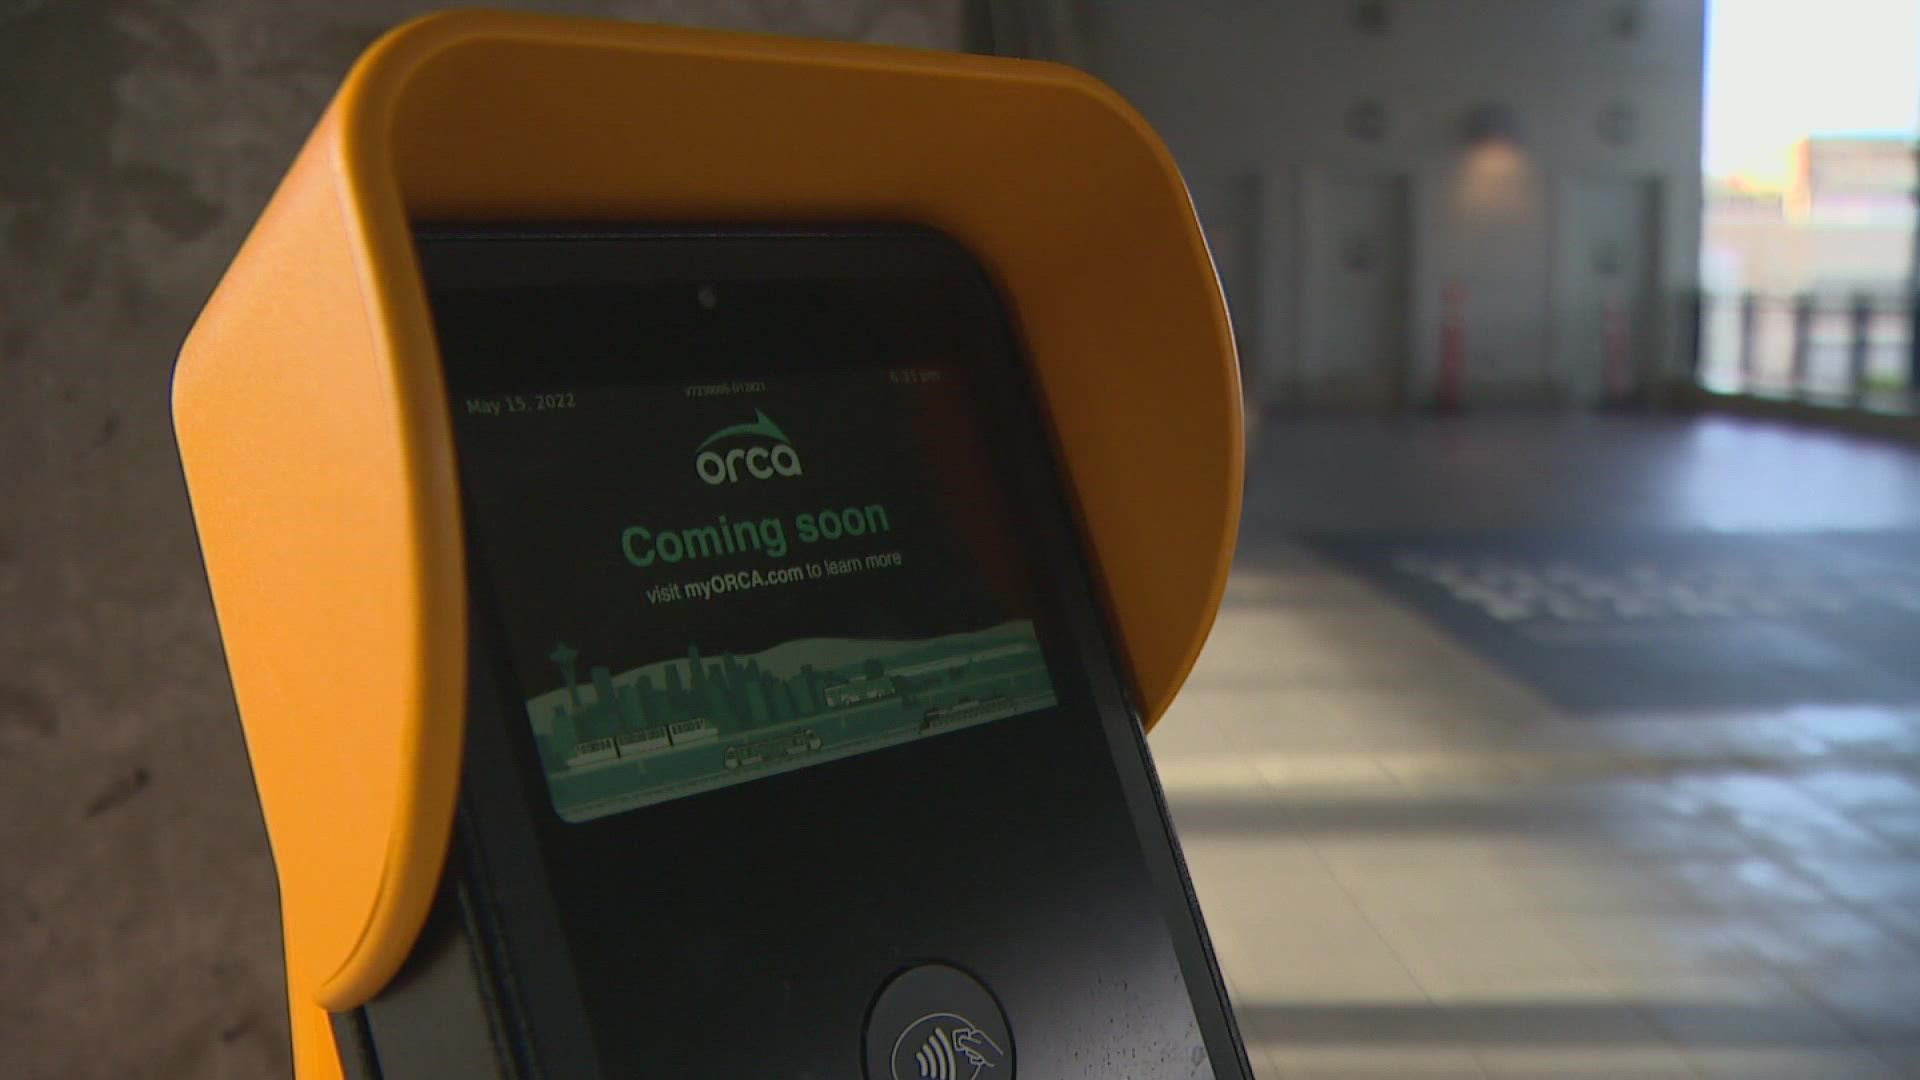 A new ORCA ticketing system launched Monday, aiming to boost ease and efficiency of account management.